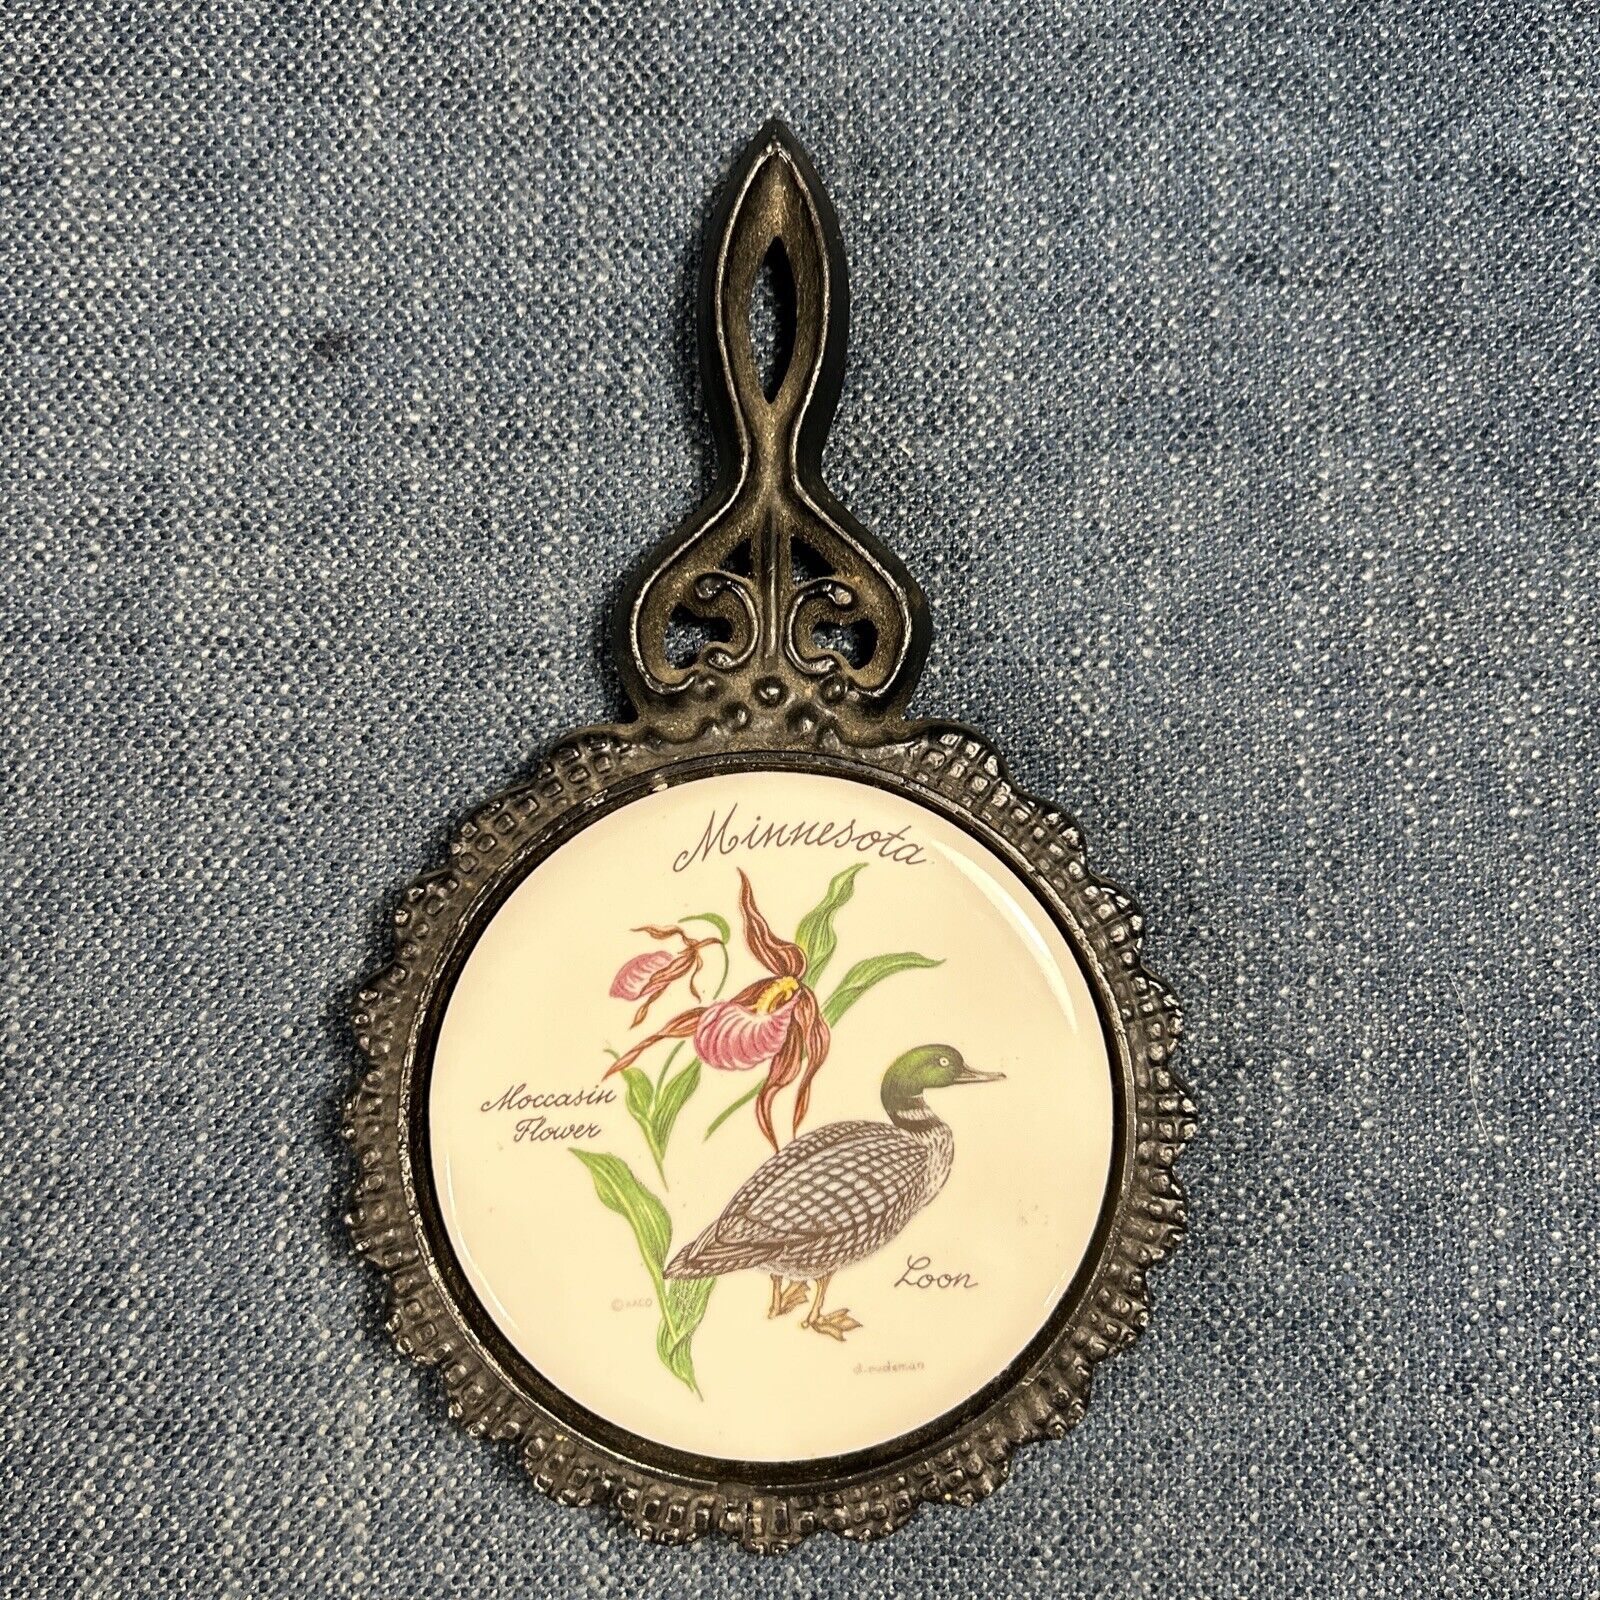 Cast Iron Tile Trivet State of Minnesota Loon And Moccasin Flower (Lady Slipper)